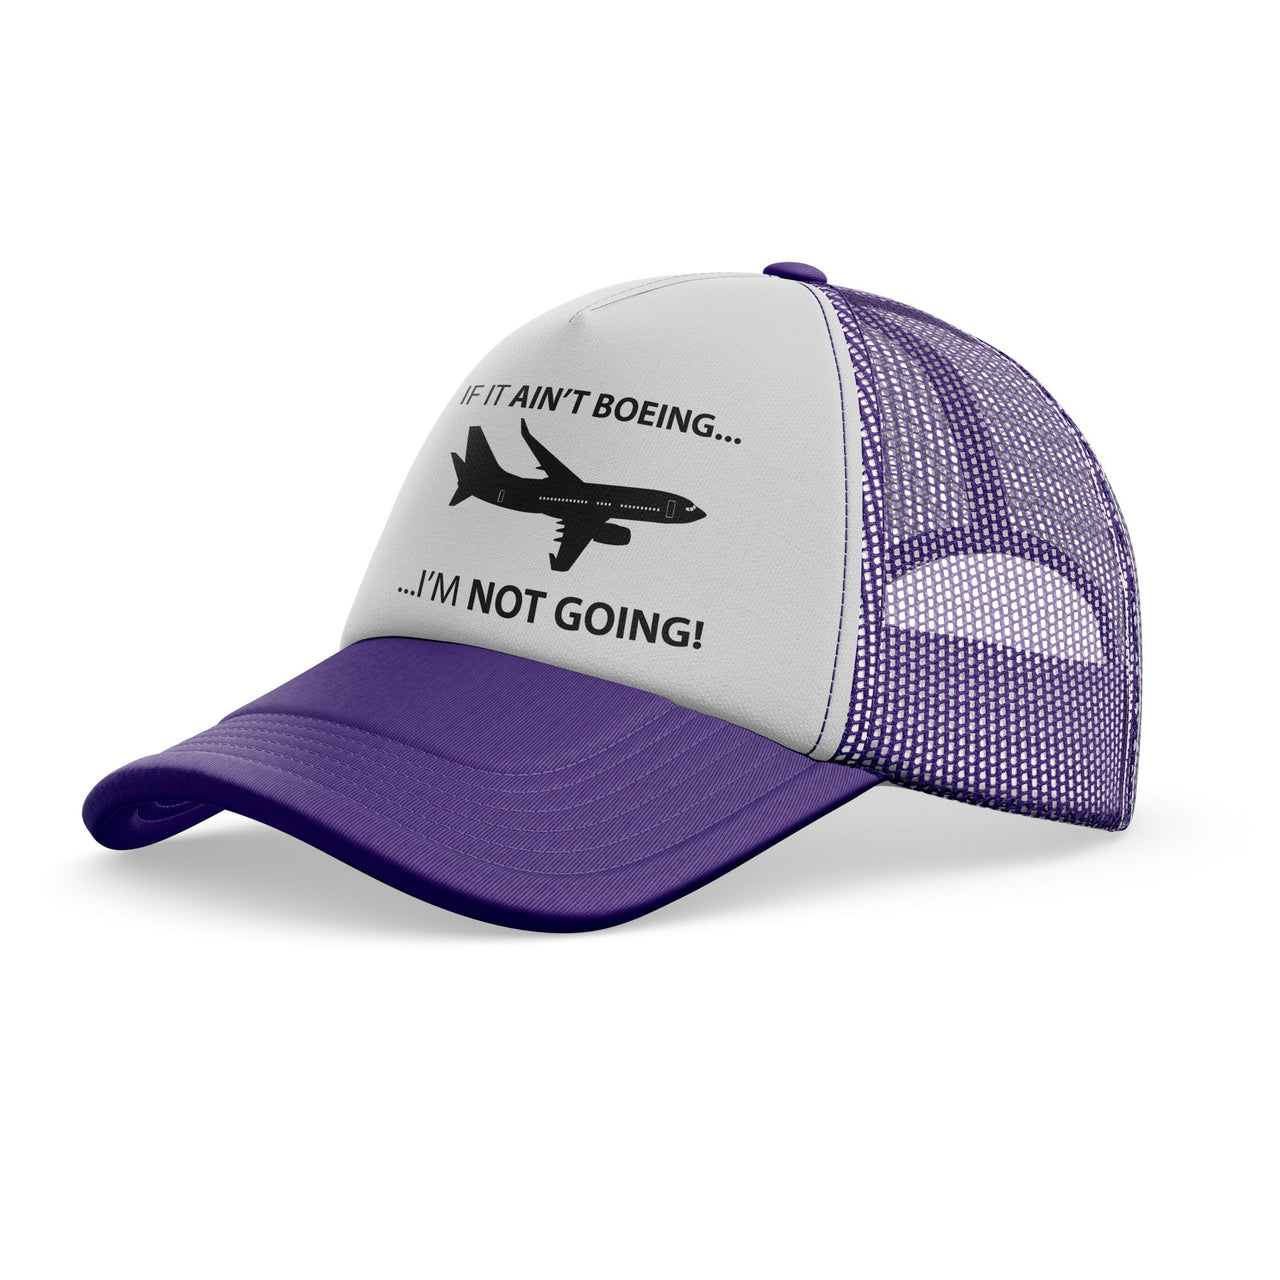 If It Ain't Boeing I'm Not Going! Designed Trucker Caps & Hats